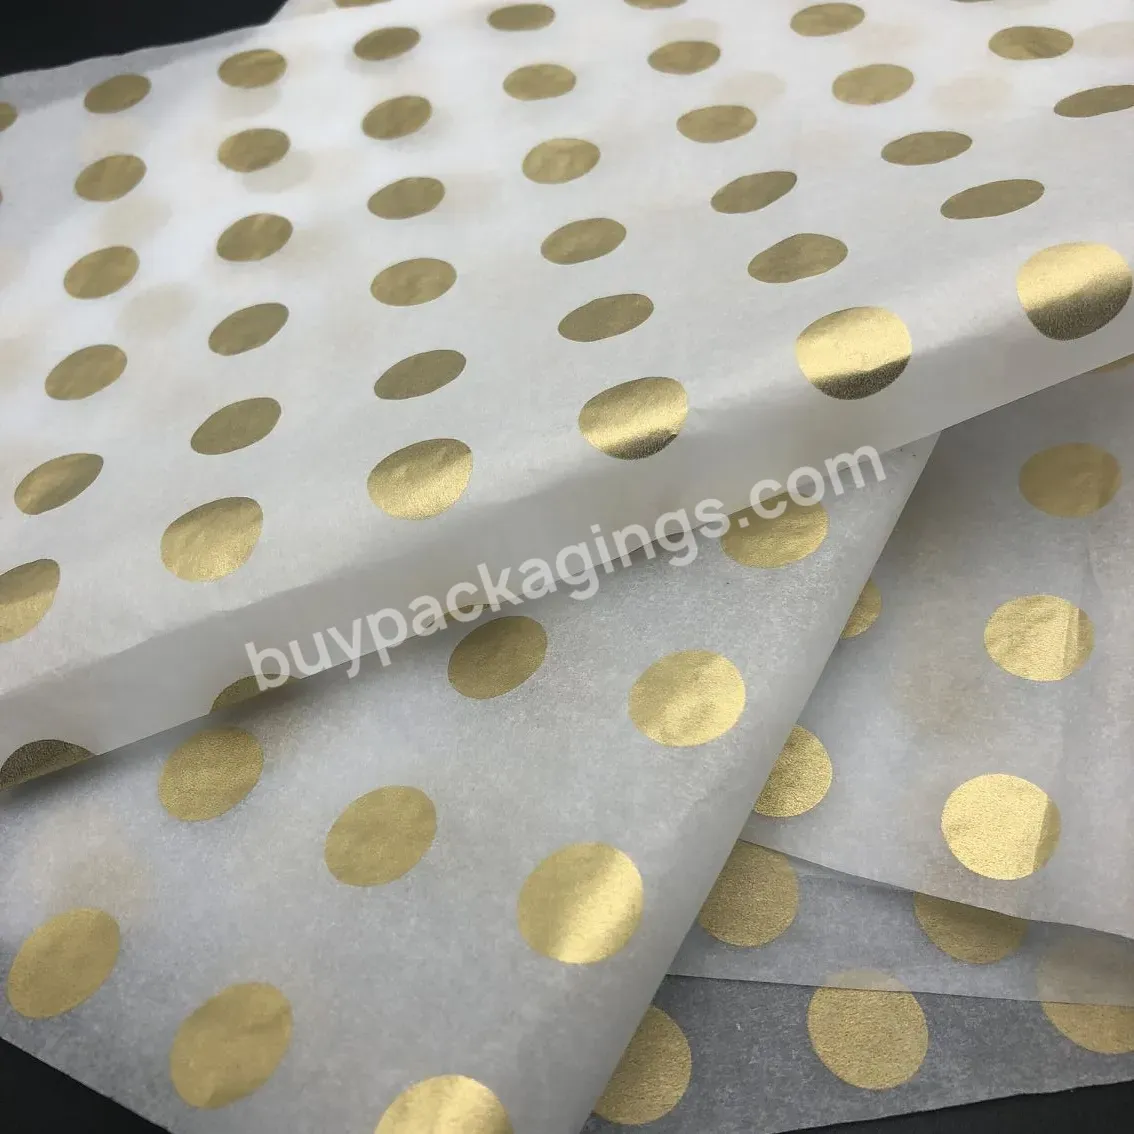 17g Acid Free White Tissue Paper With Gold Circle Printed Logo Wrapping Paper/mf Acid Free Tissue Paper - Buy Mf Acid Free Tissue Paper,Gold Circle Printed Logo Wrapping Paper,Gold Circle Wrapping Paper.